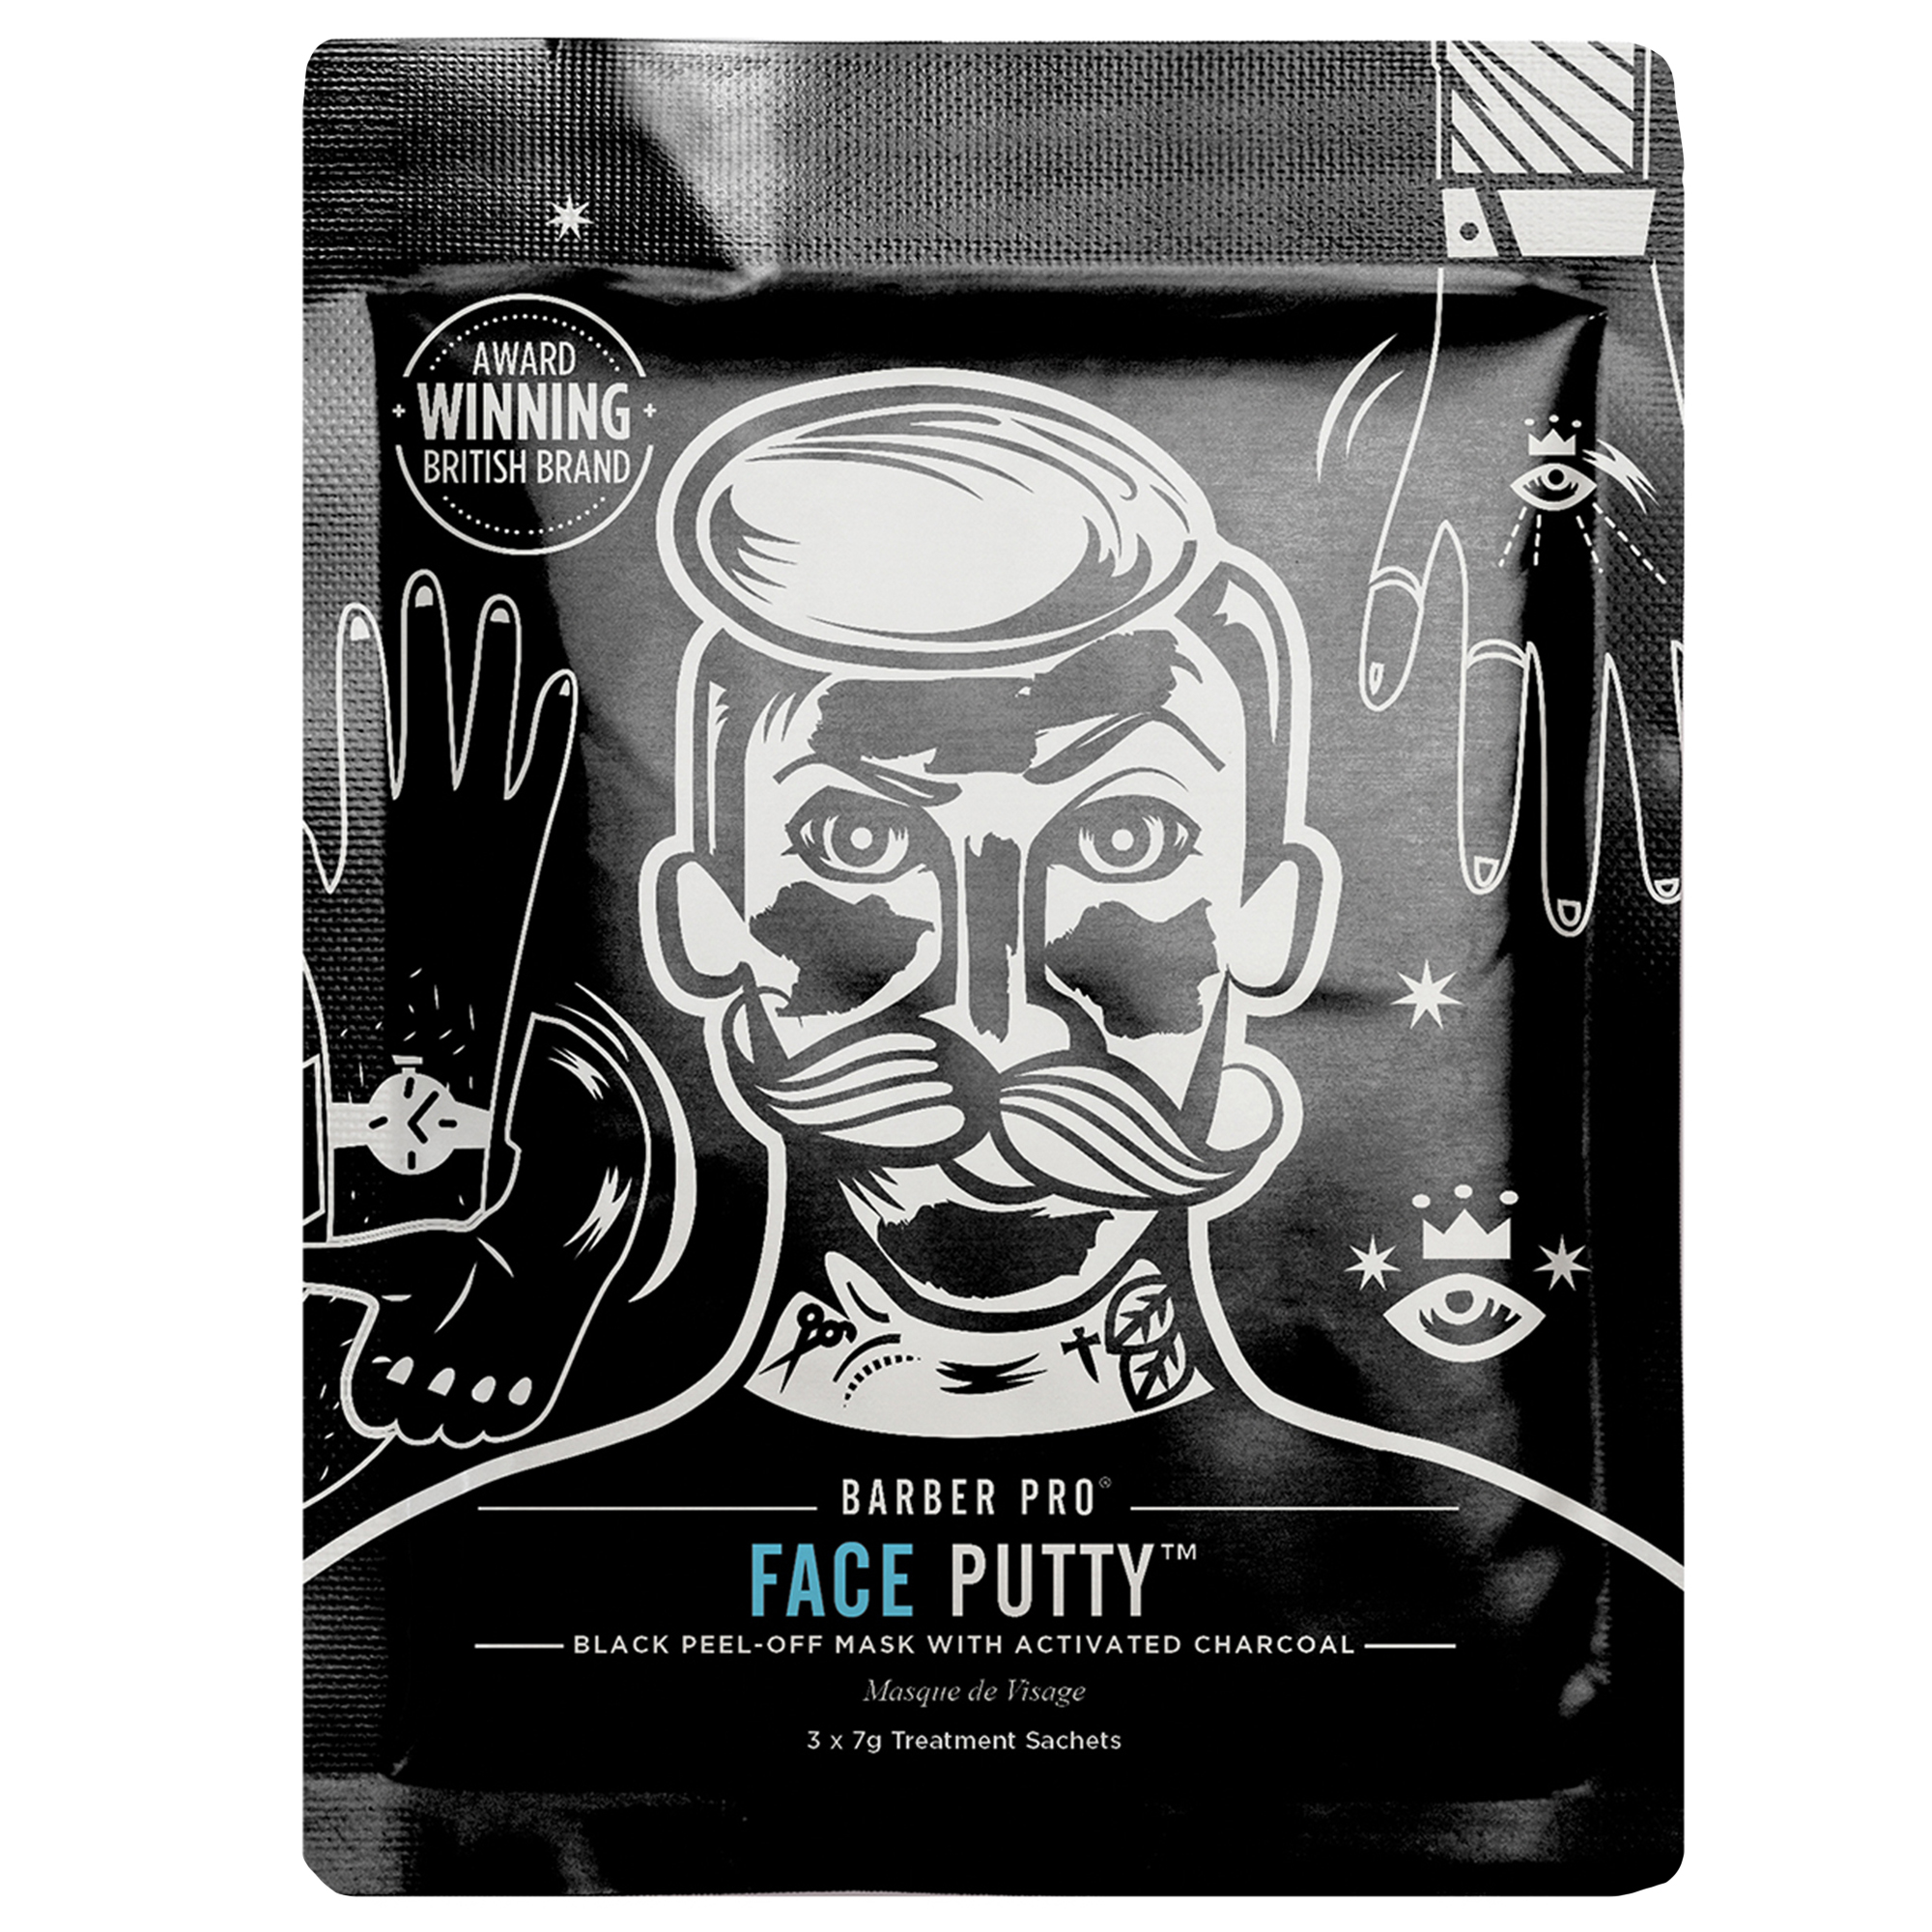 FACE PUTTY PEEL-OFF MASK 